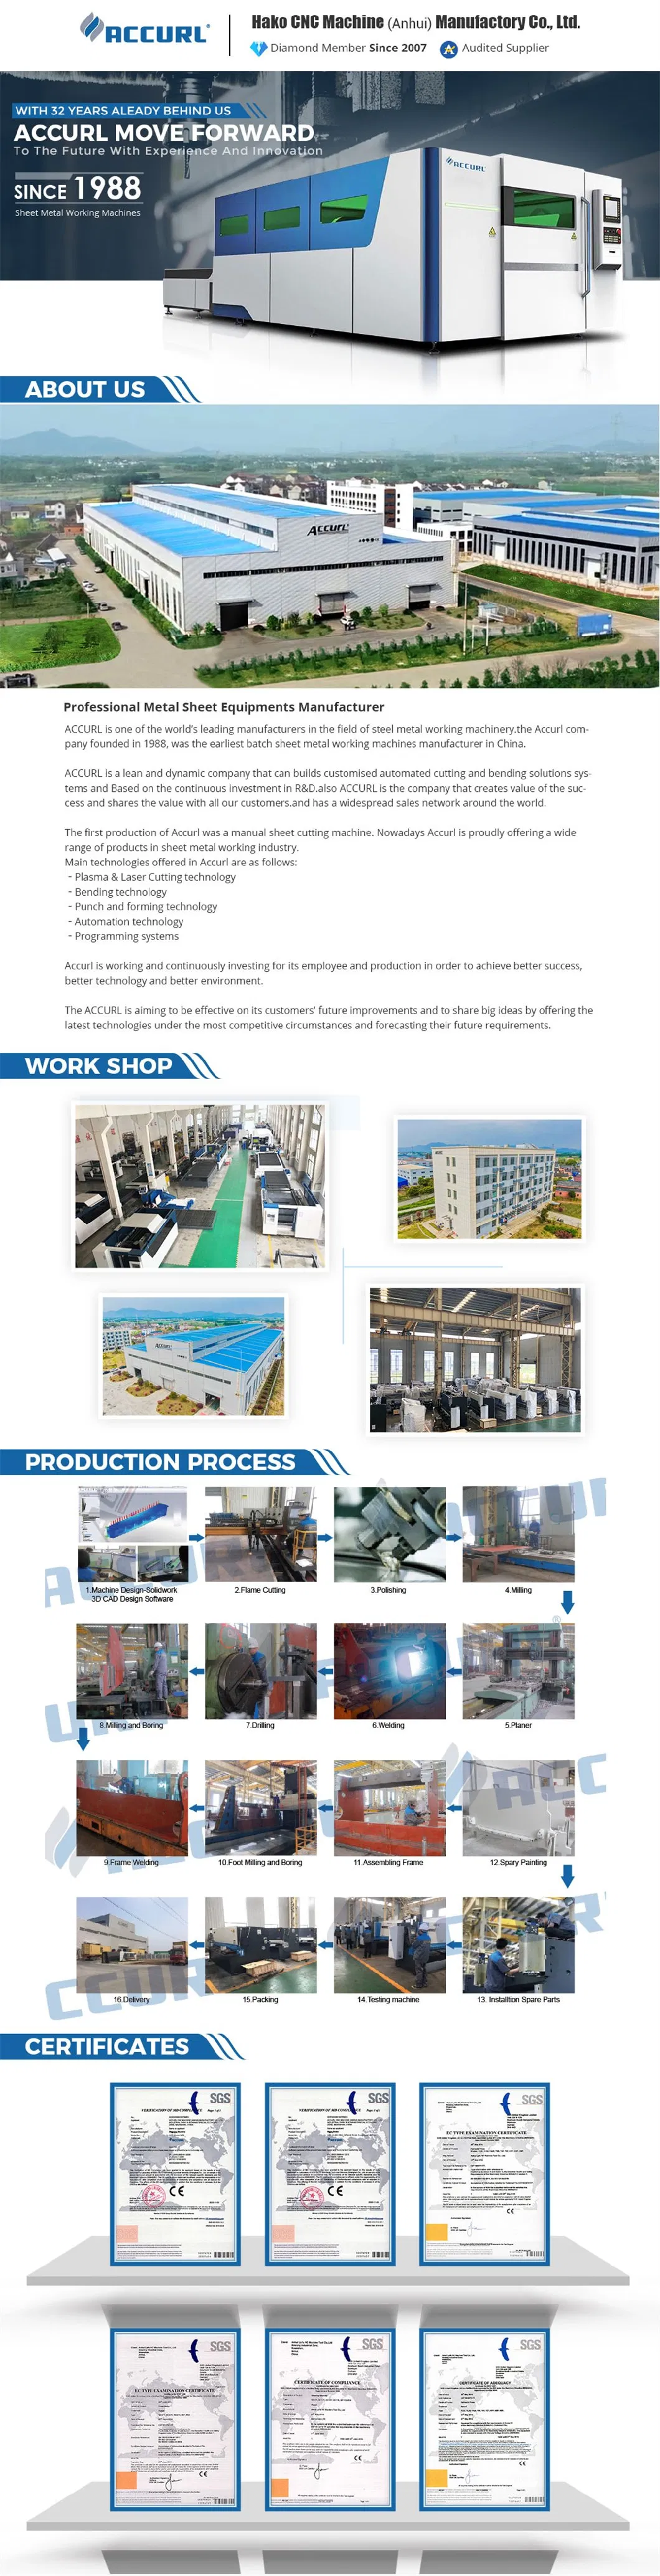 Specializing in The Production of 630 Tons High Speed Double Acting H Frame Deep Drawing Hydraulic Press Machine